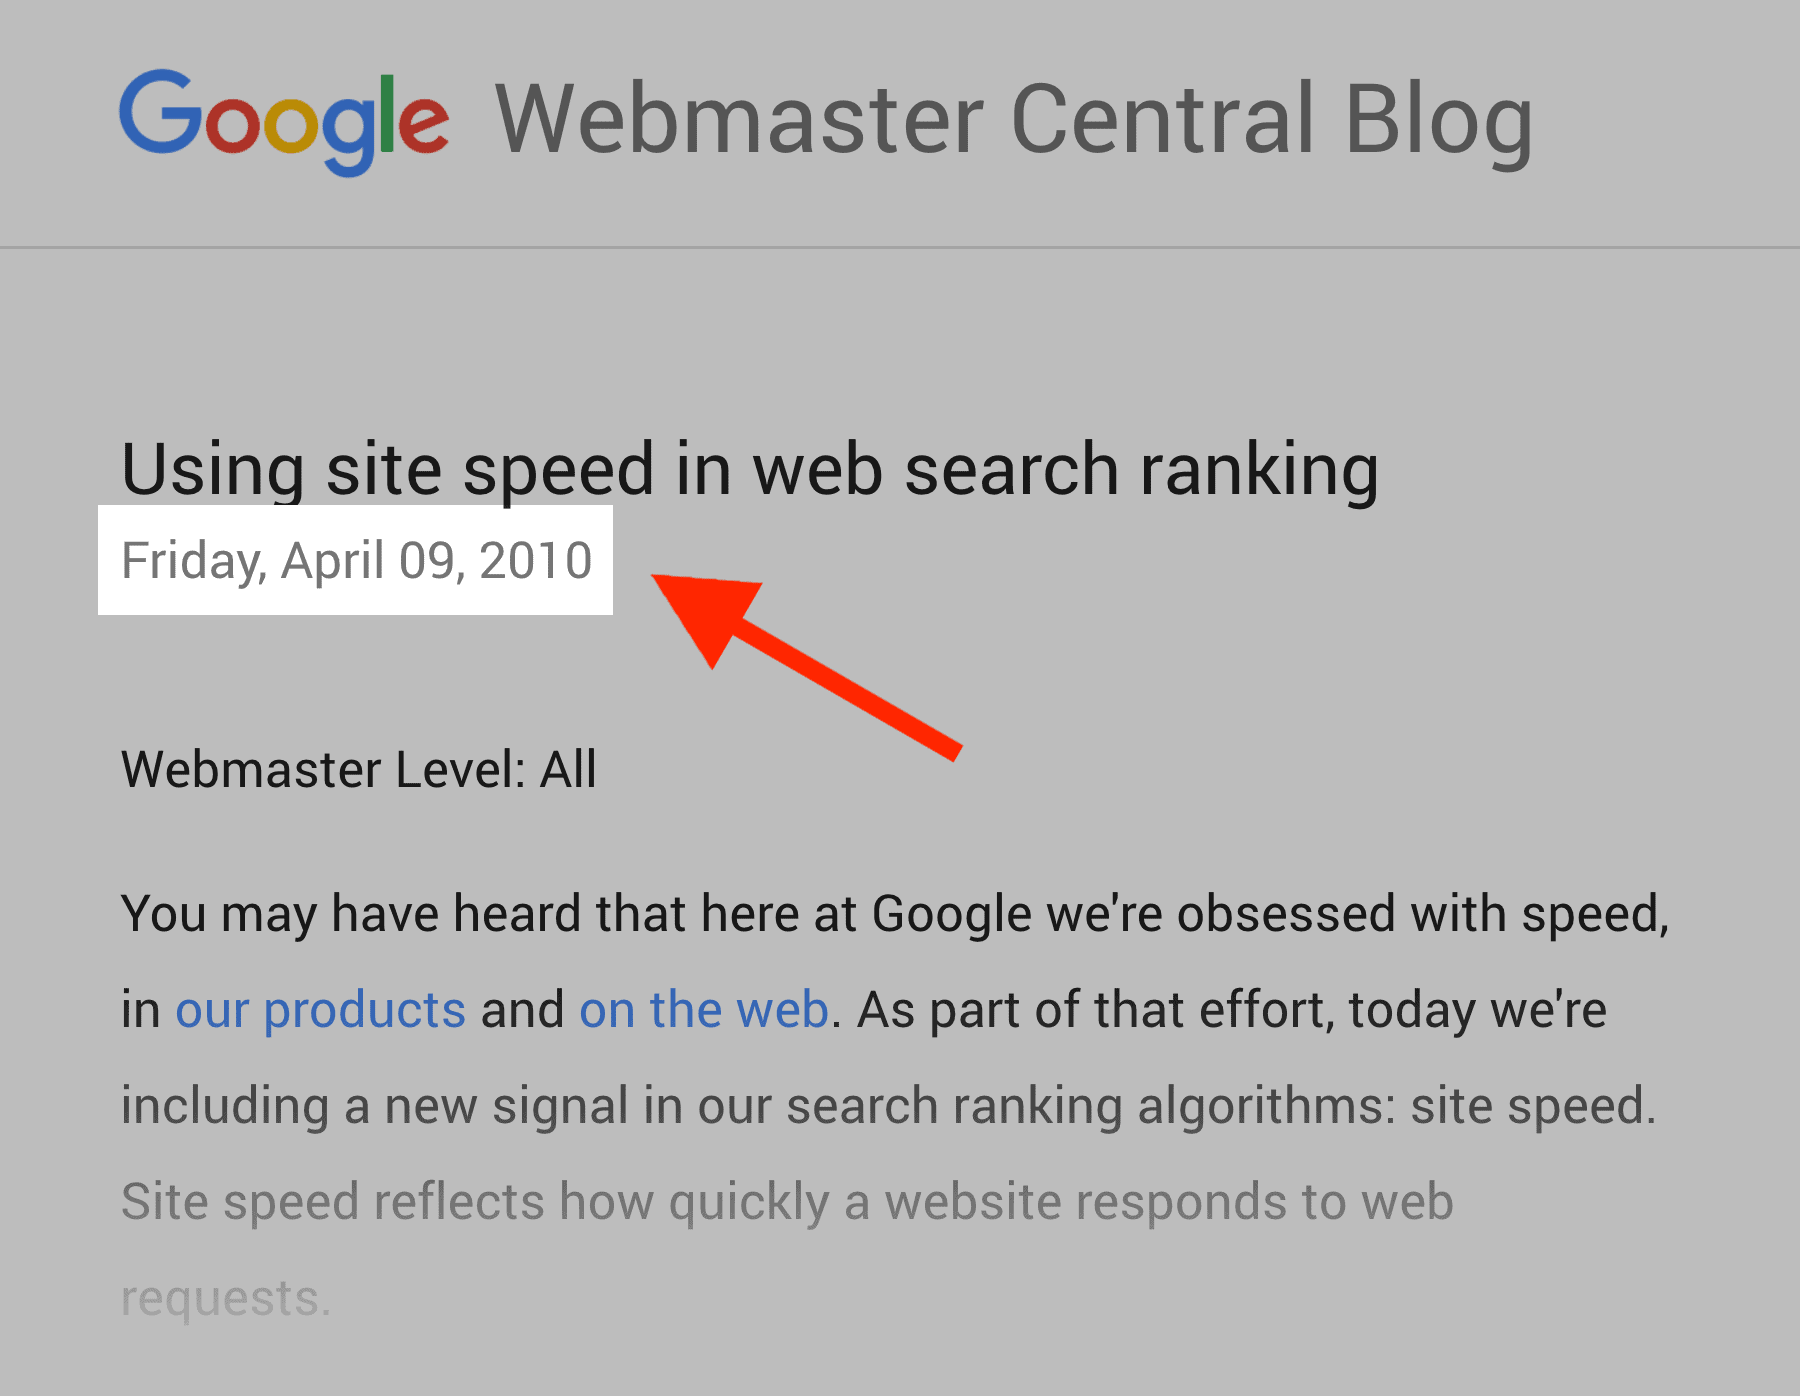 Site speed a factor - Since 2010